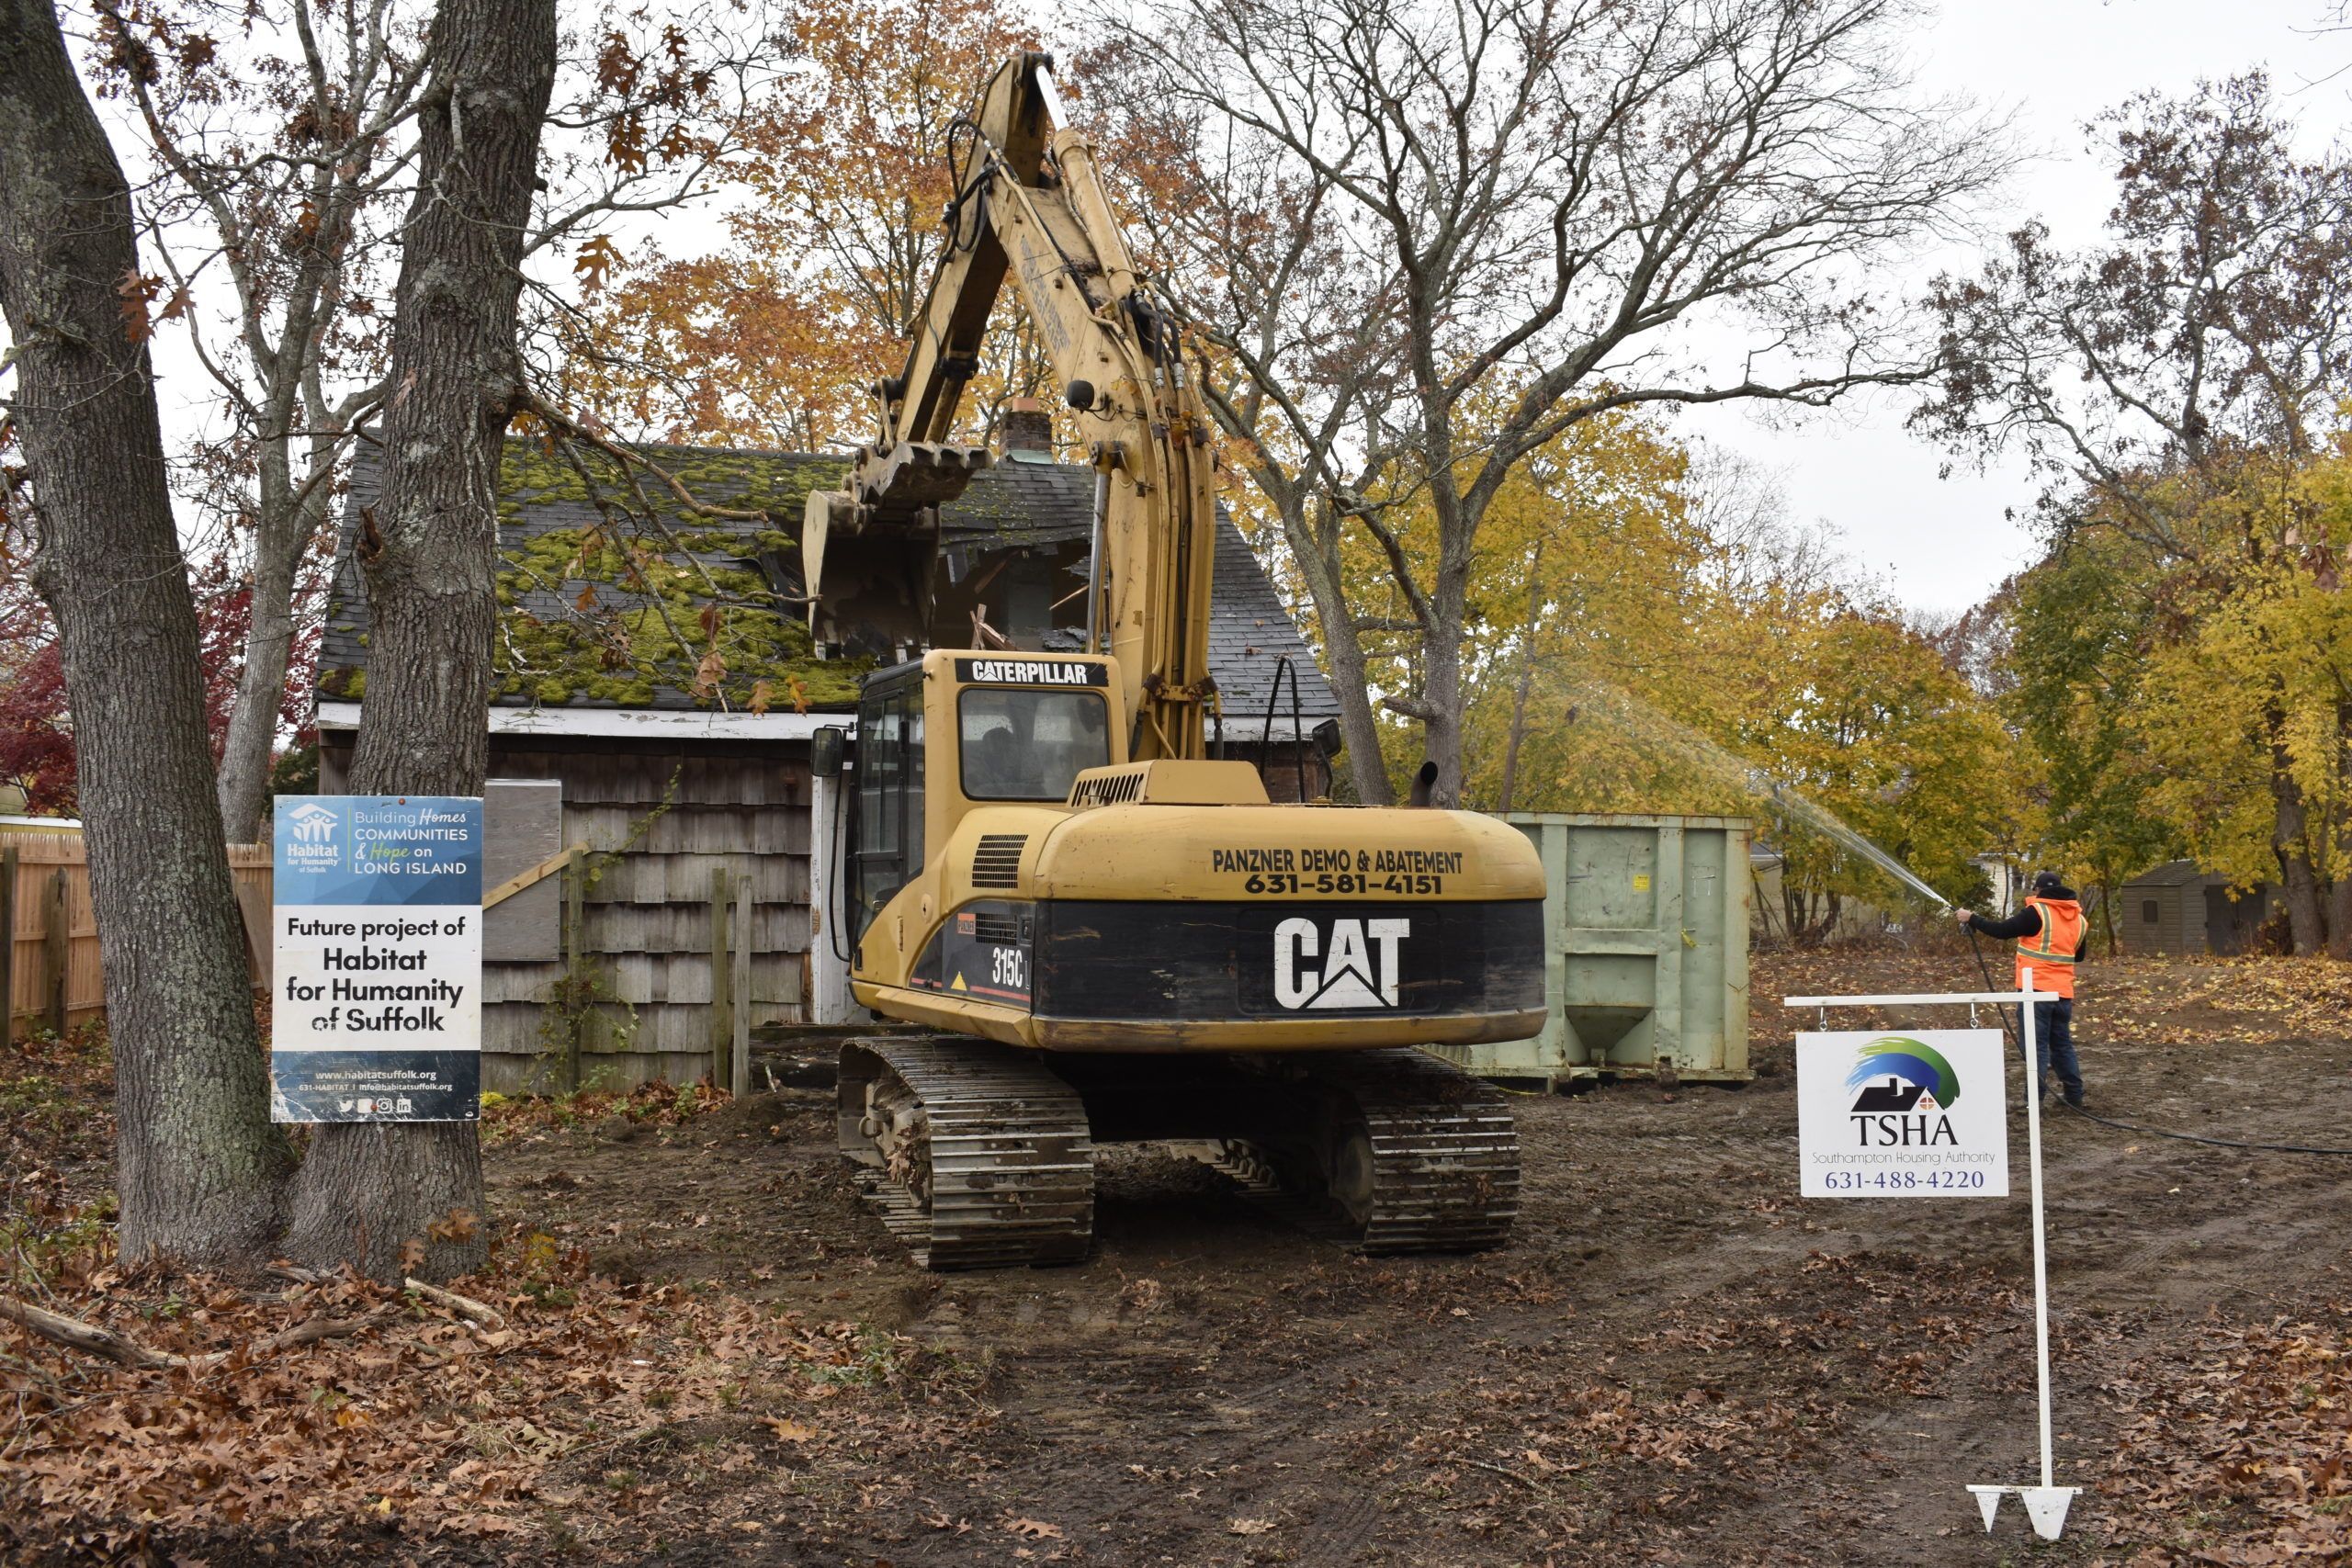 An abandoned house in Riverside is razed to make way for five affordable single-family homes to be constructed as a joint venture by the Southampton Housing Authority and Habitat for Humanity of Suffolk.